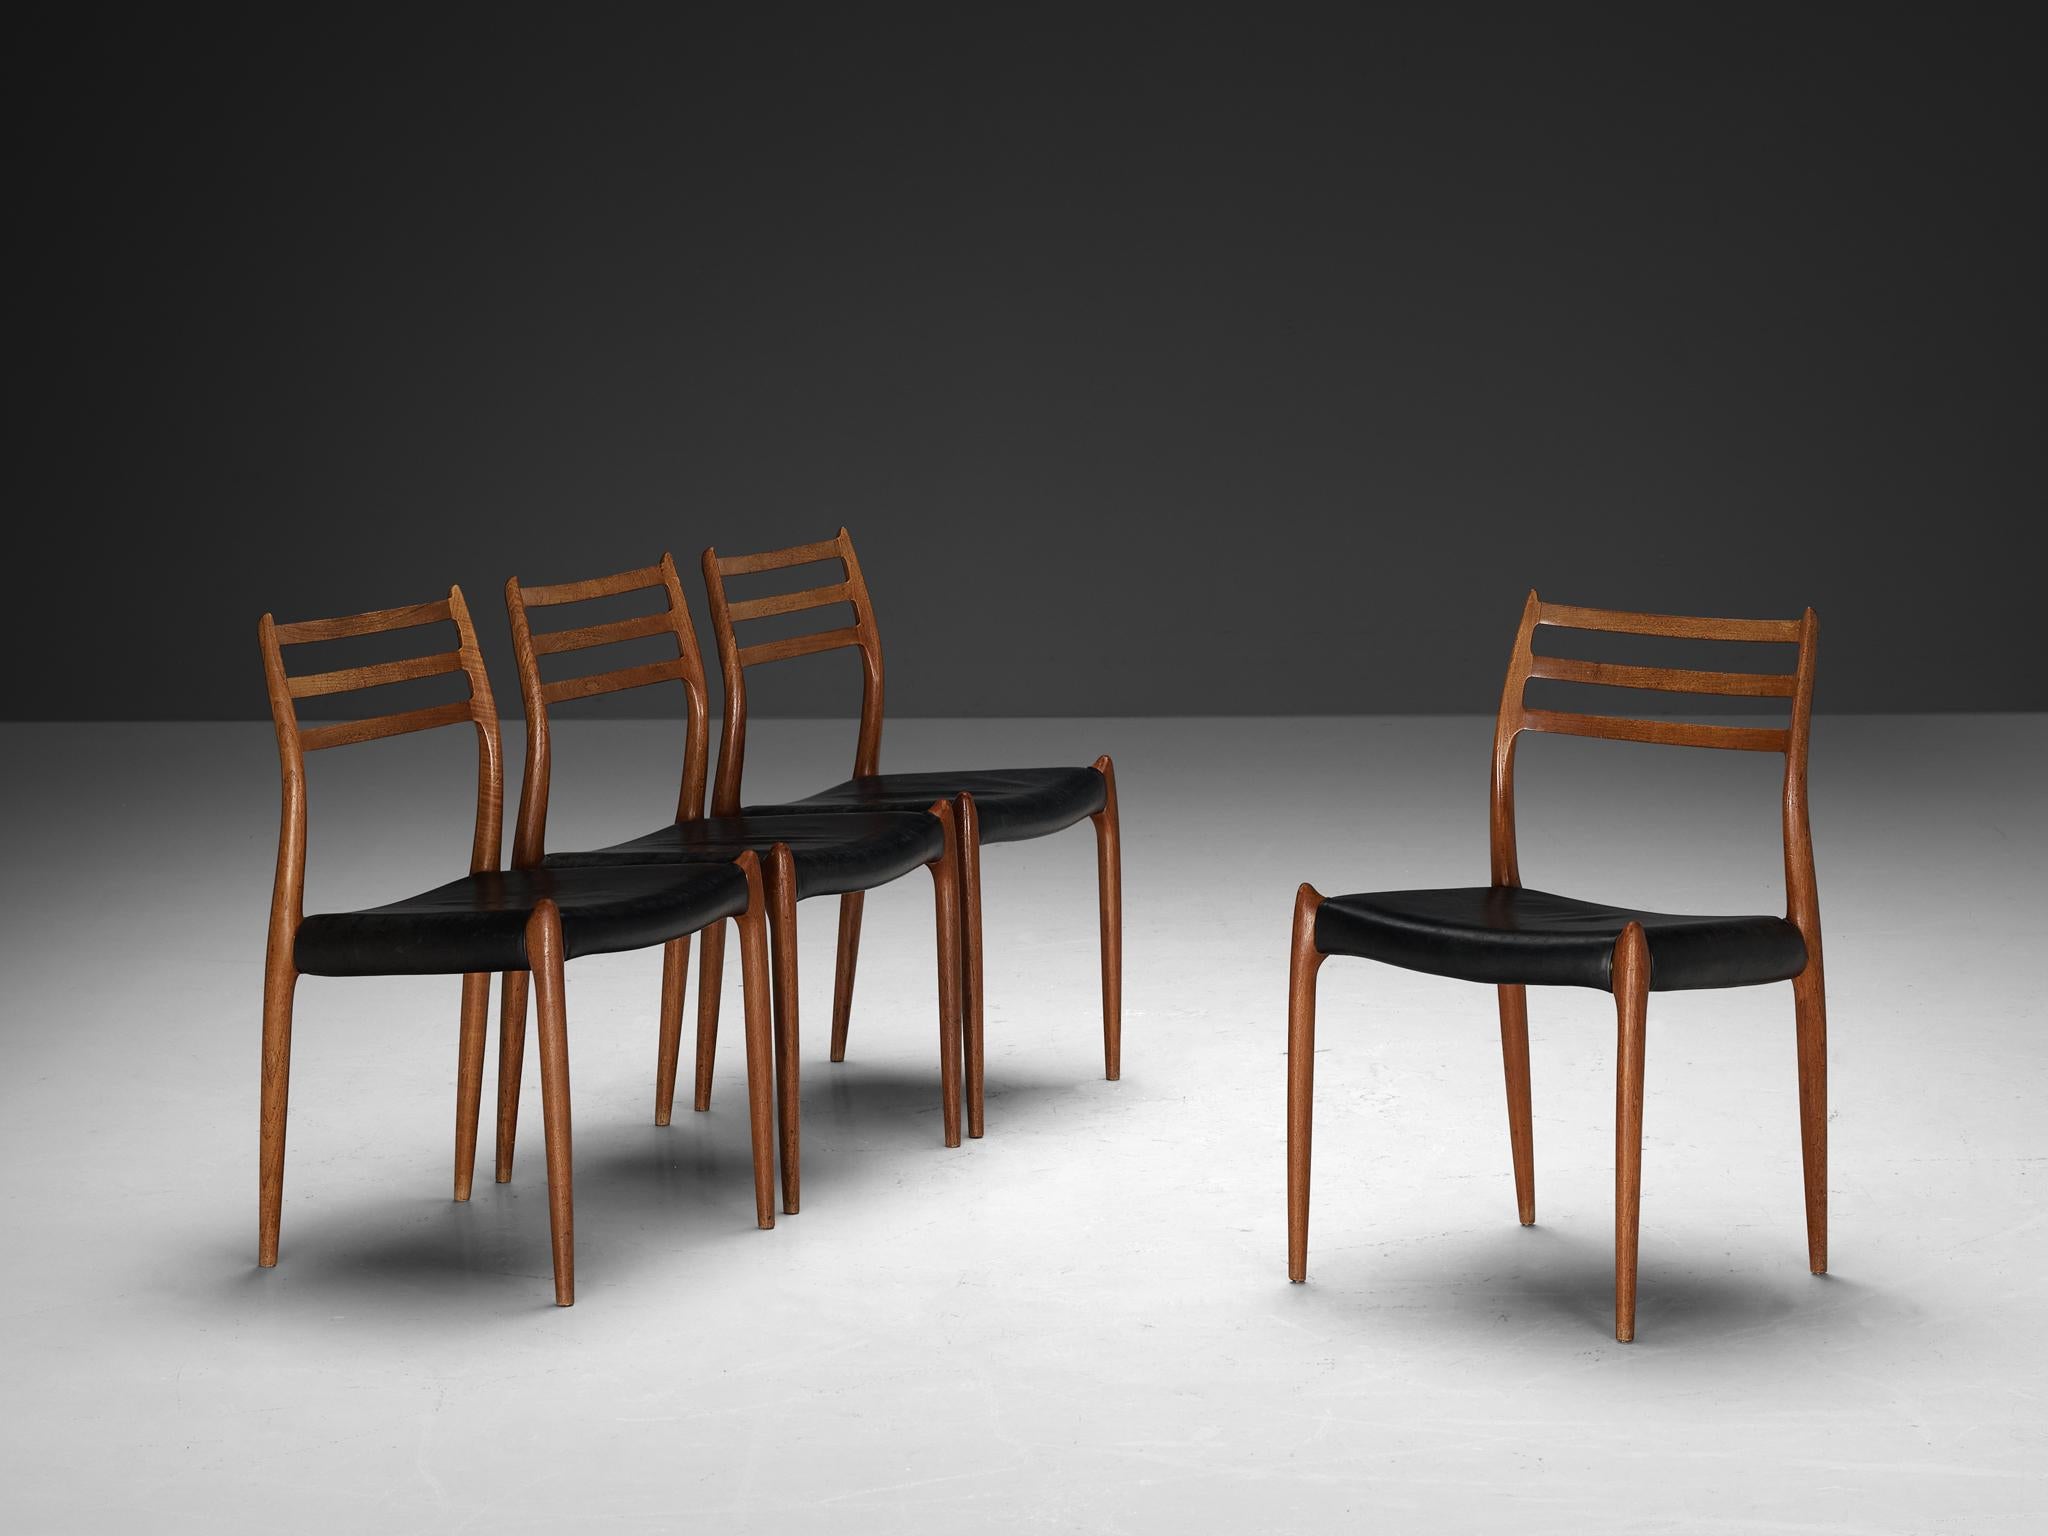 Niels Otto Møller, set of four dining chairs, model 78, teak, leather, Denmark, 1960s.

A beautiful dining set designed by Danish Niels Otto Møller. Carved from the rich, lustrous grain of teak wood, these chairs stand as tributes to Møller's